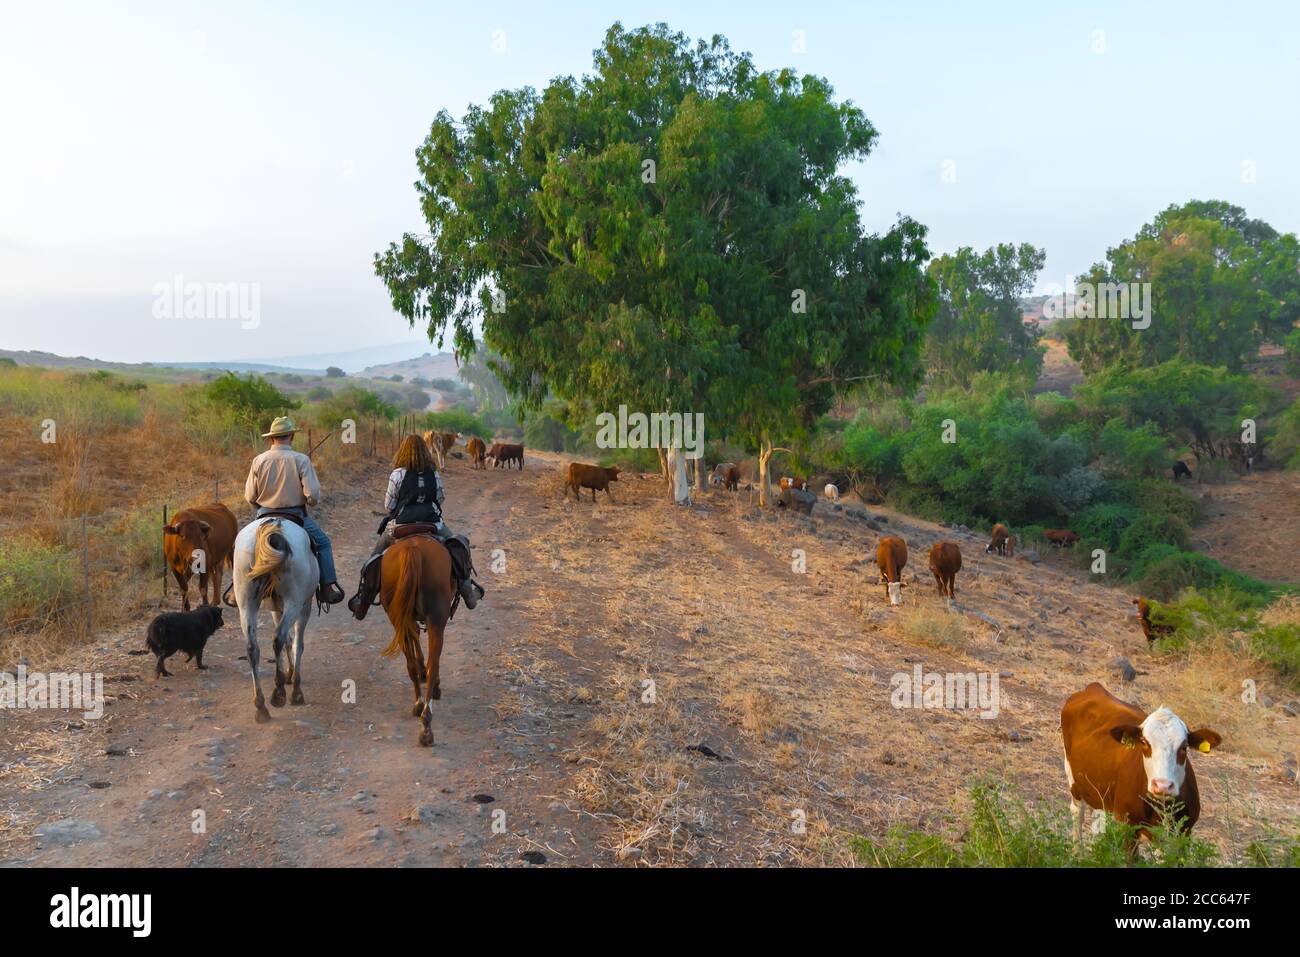 Horse back riding in the Jezreel Valley, Israel. Stock Photo